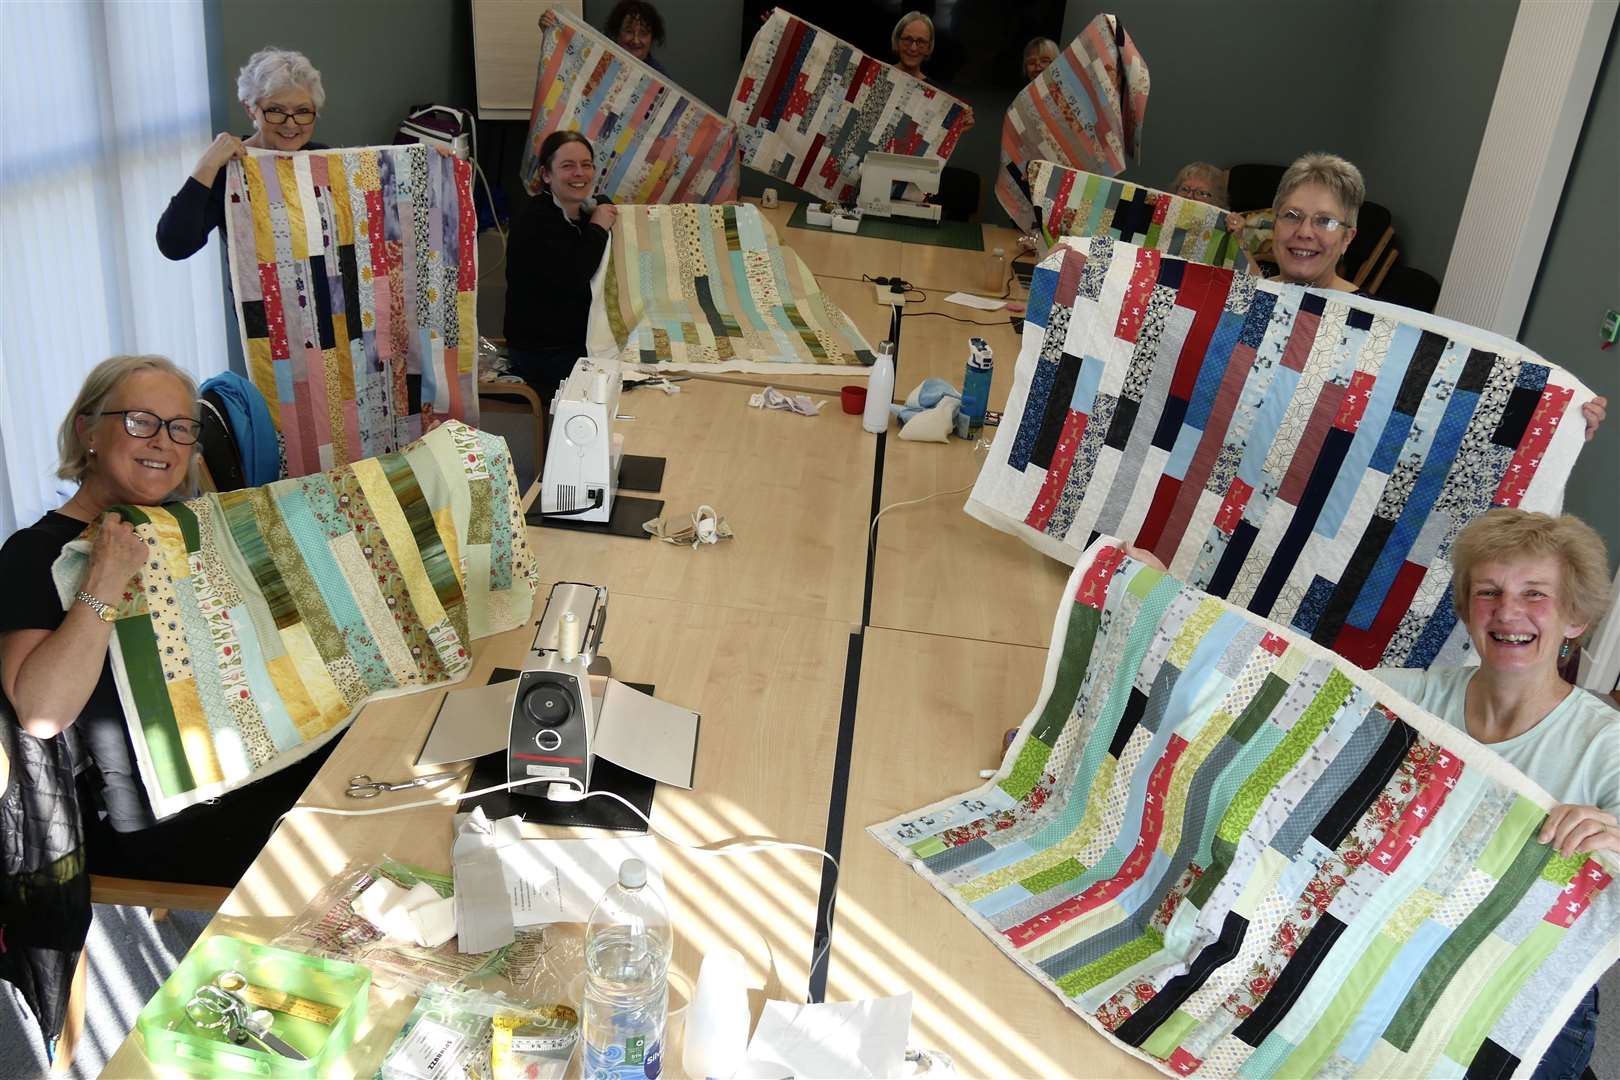 The jelly roll cot quilting workshop: Anne Sangster, Carol Carolan, Amy Buchanan, Esther Farquharson, Sue Gardiner (tutor), Sue Tomlinson, Martyne Cockerill, Rona Button, Evelyn Cromarty. Picture: Peter Wild